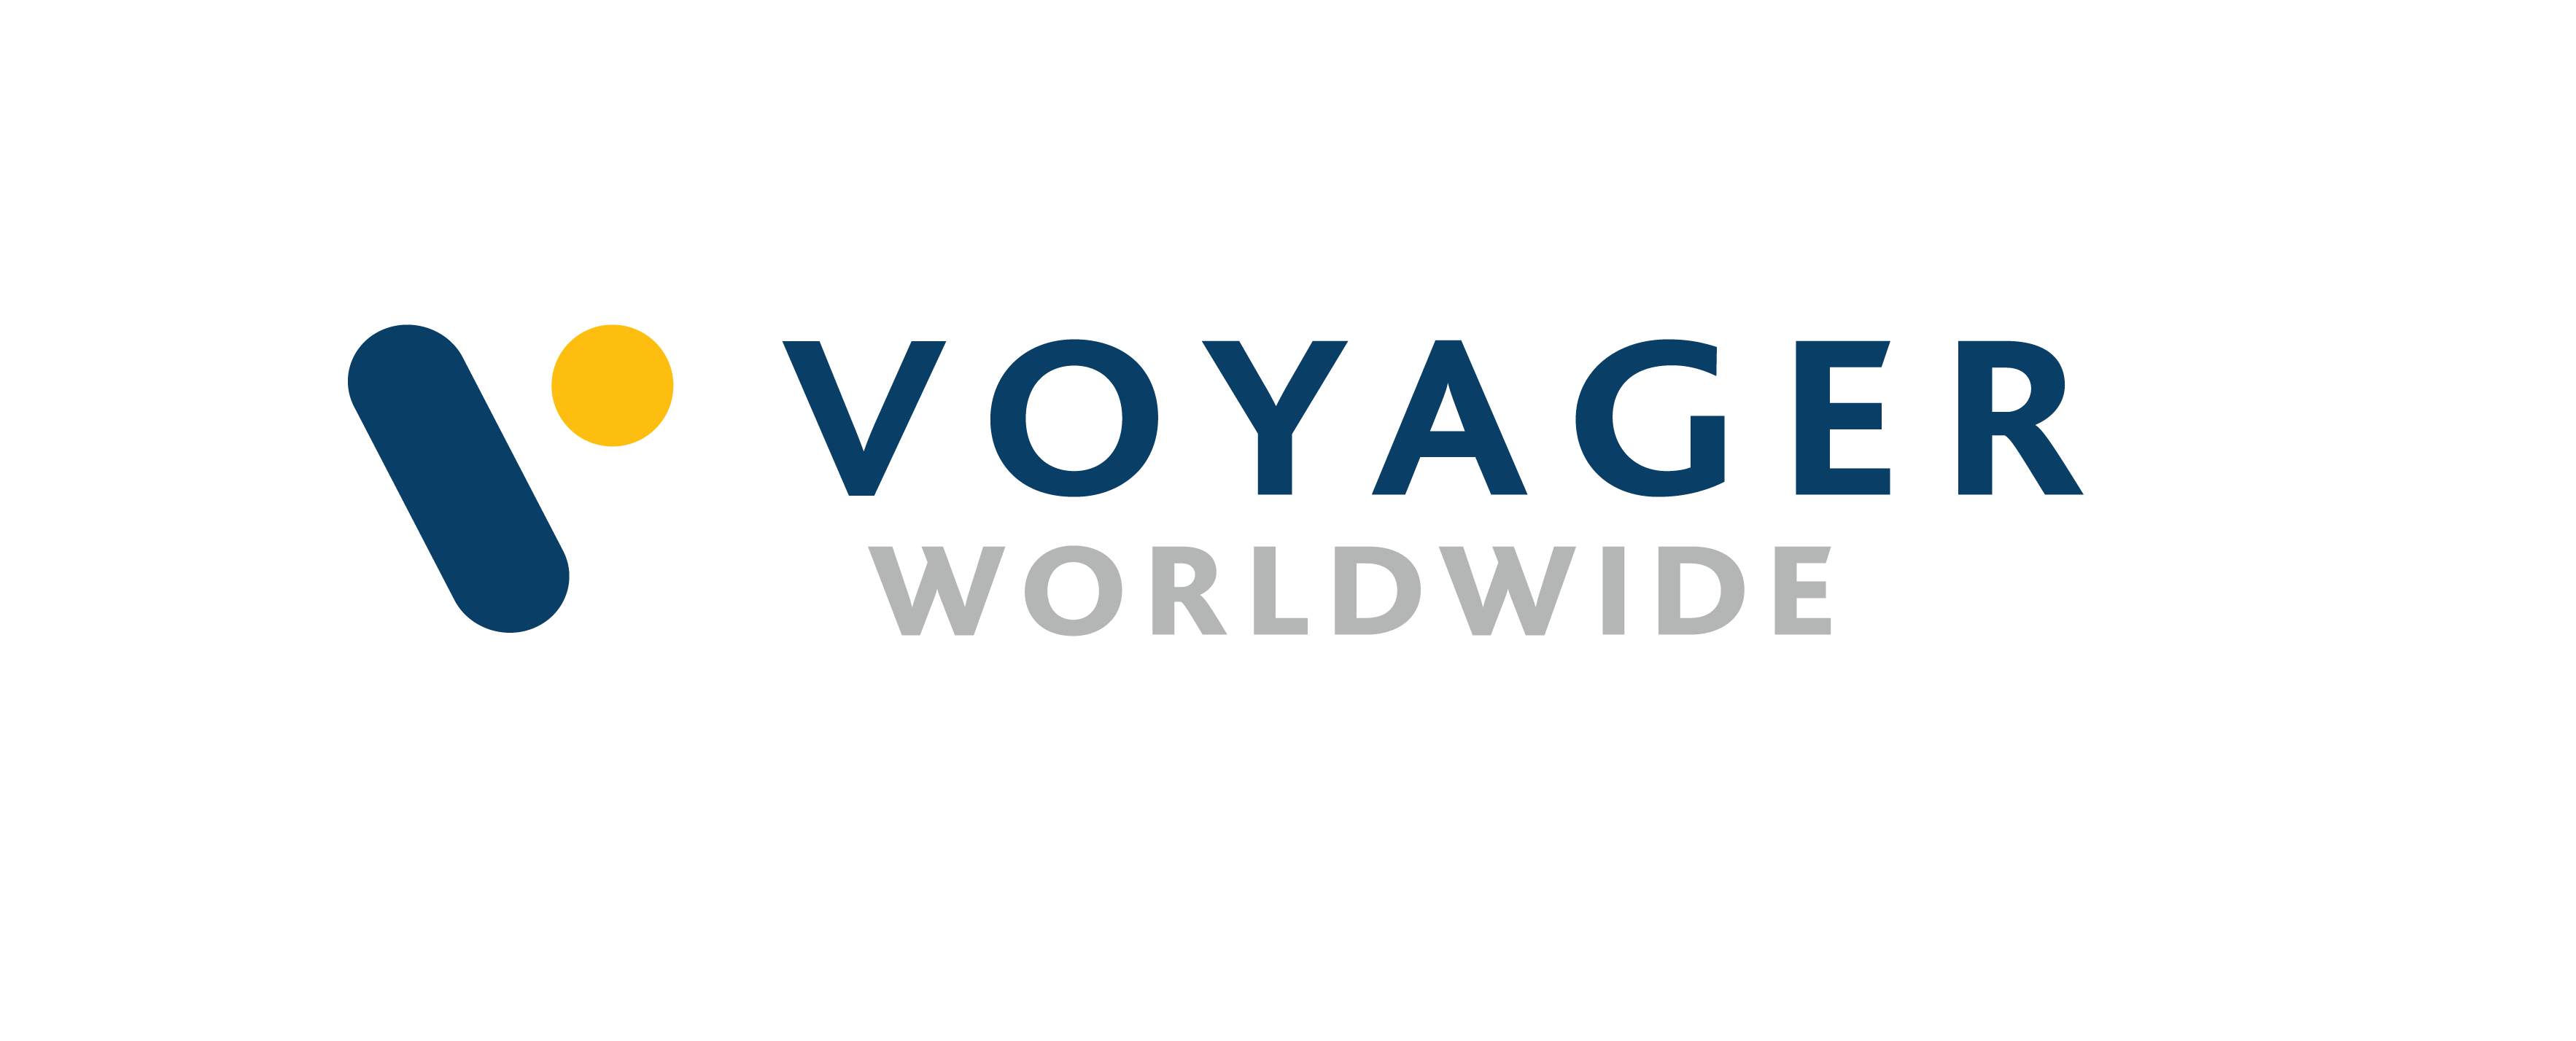 Announcing Voyager Worldwide